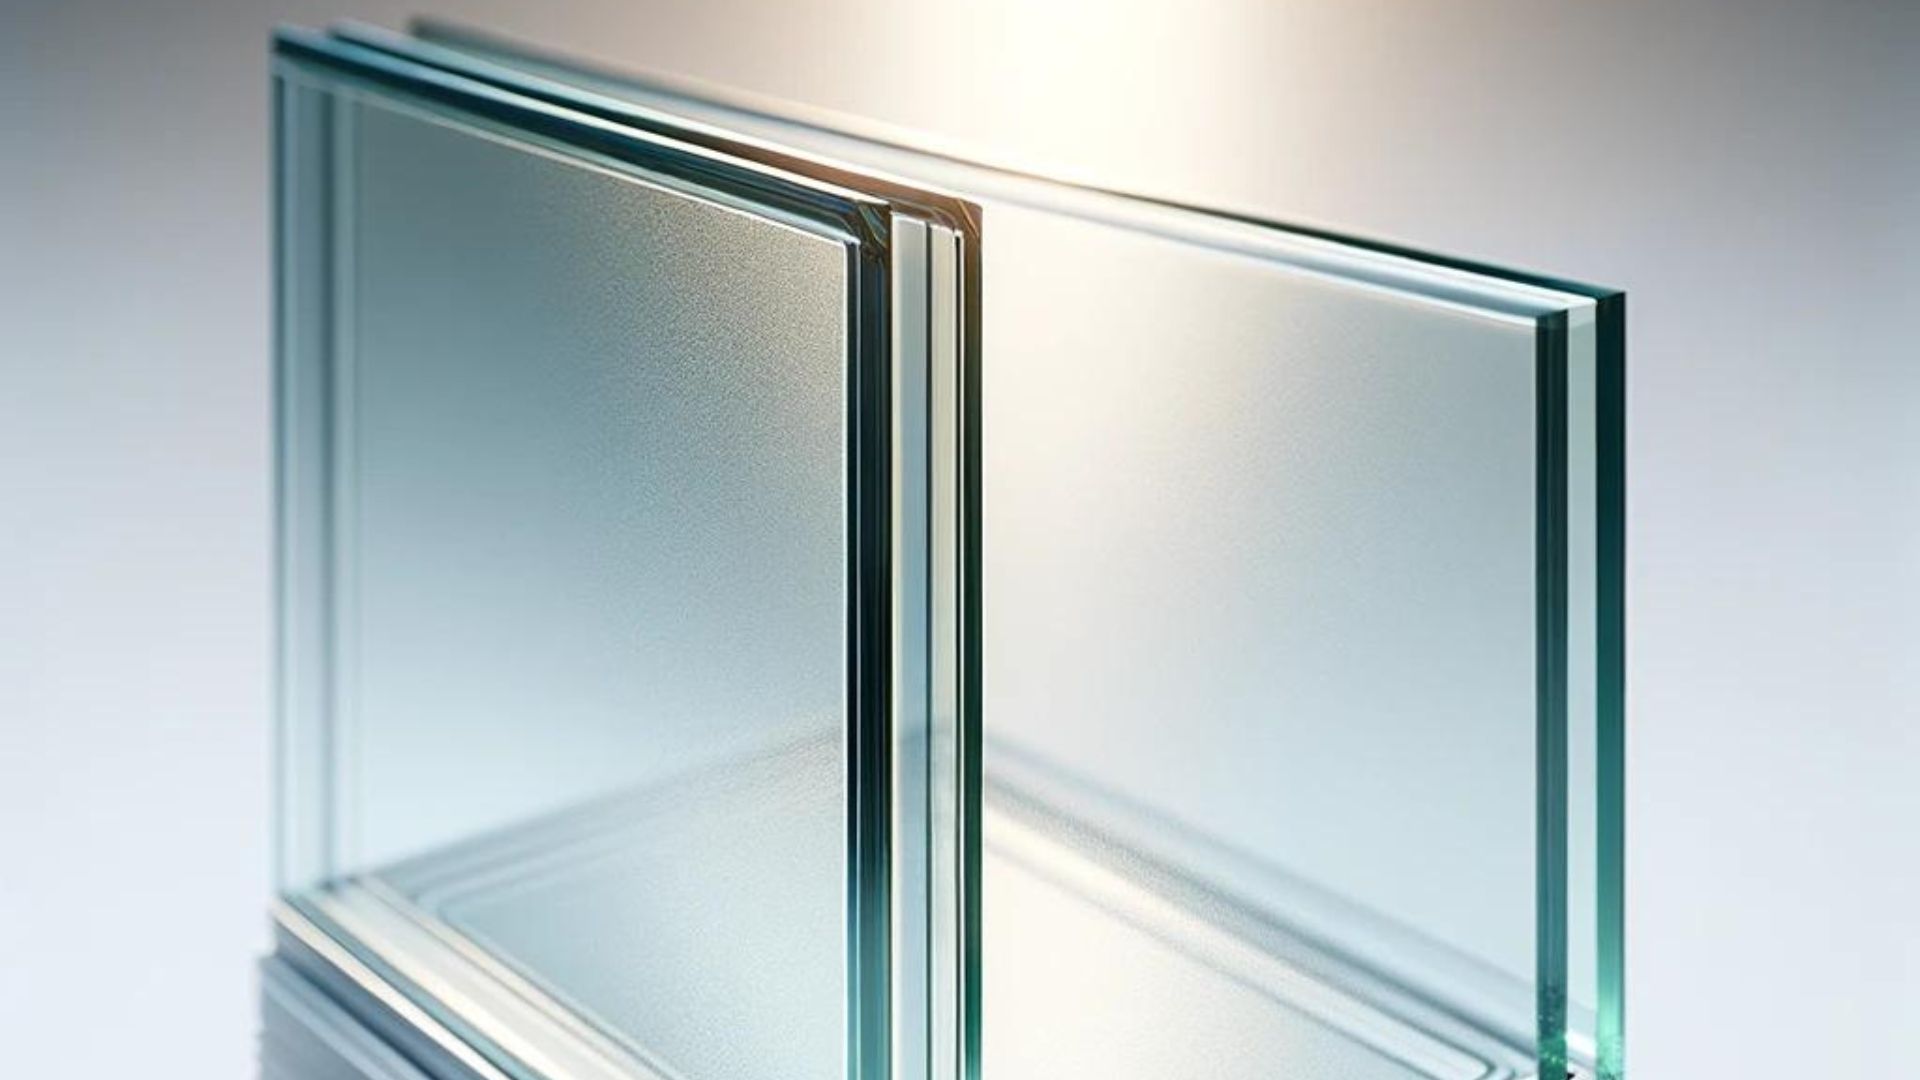 What kind of glass should you get installed in an IGU? Get the lowdown in our jargon-free blog post.